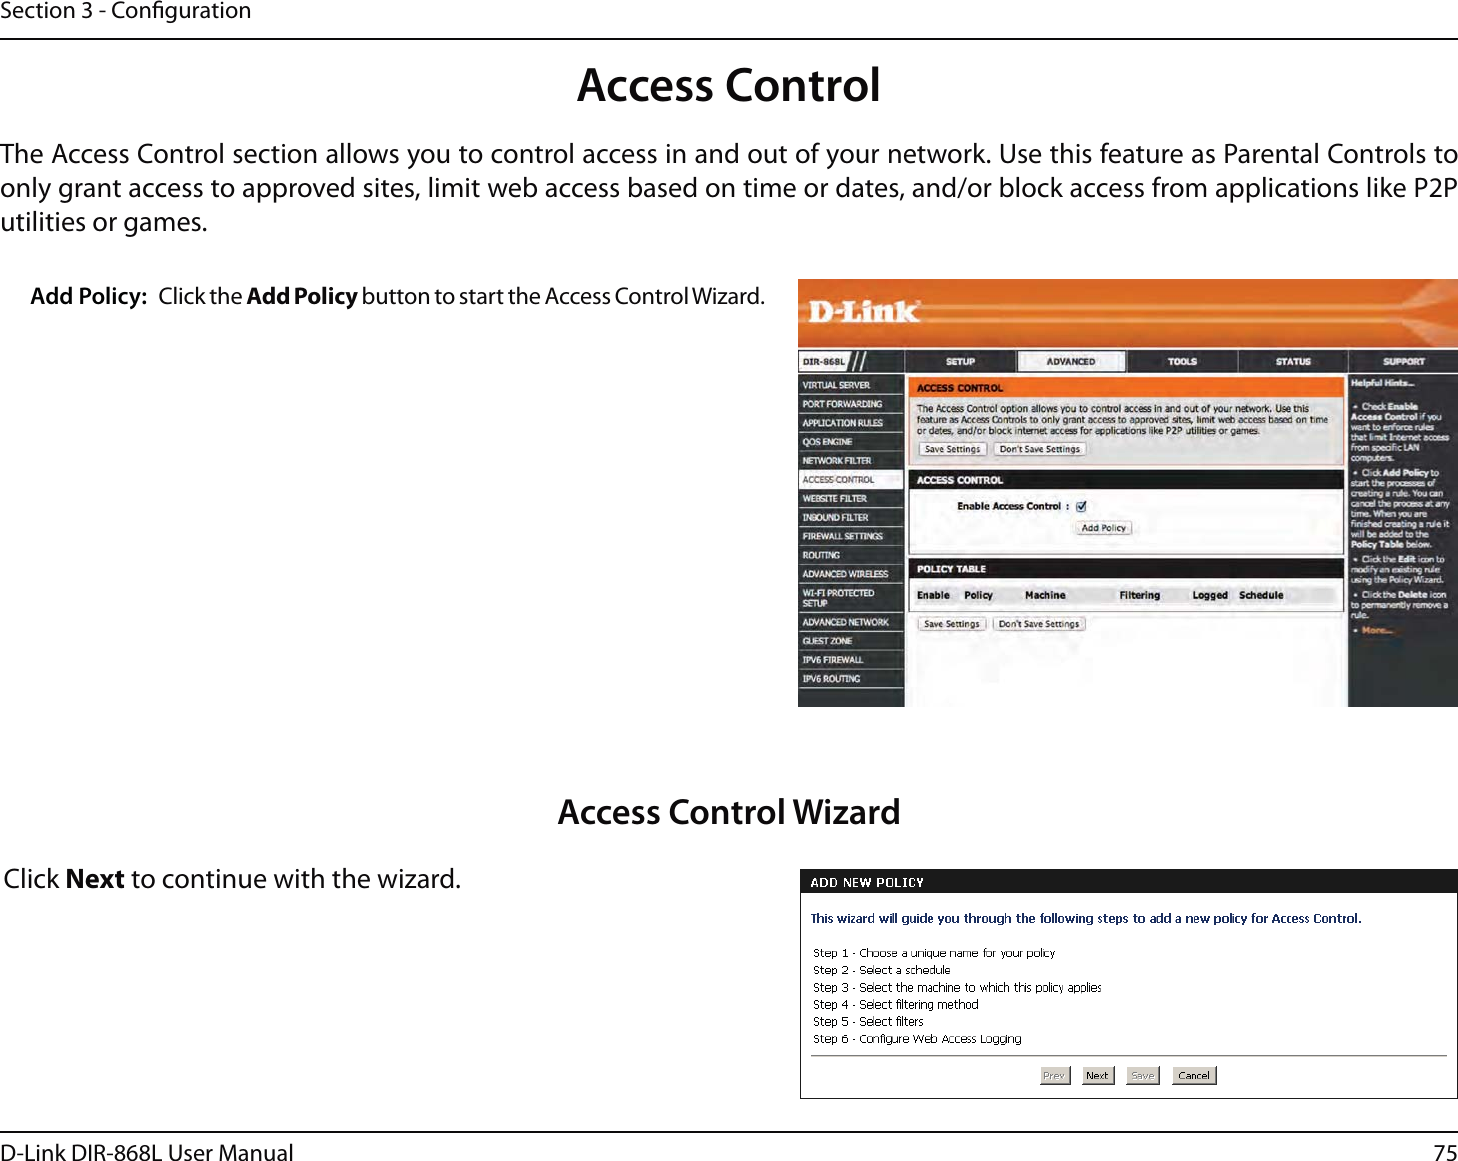 75D-Link DIR-868L User ManualSection 3 - CongurationAccess ControlClick the Add Policy button to start the Access Control Wizard. Add Policy:The Access Control section allows you to control access in and out of your network. Use this feature as Parental Controls to only grant access to approved sites, limit web access based on time or dates, and/or block access from applications like P2P utilities or games.Click Next to continue with the wizard.Access Control Wizard